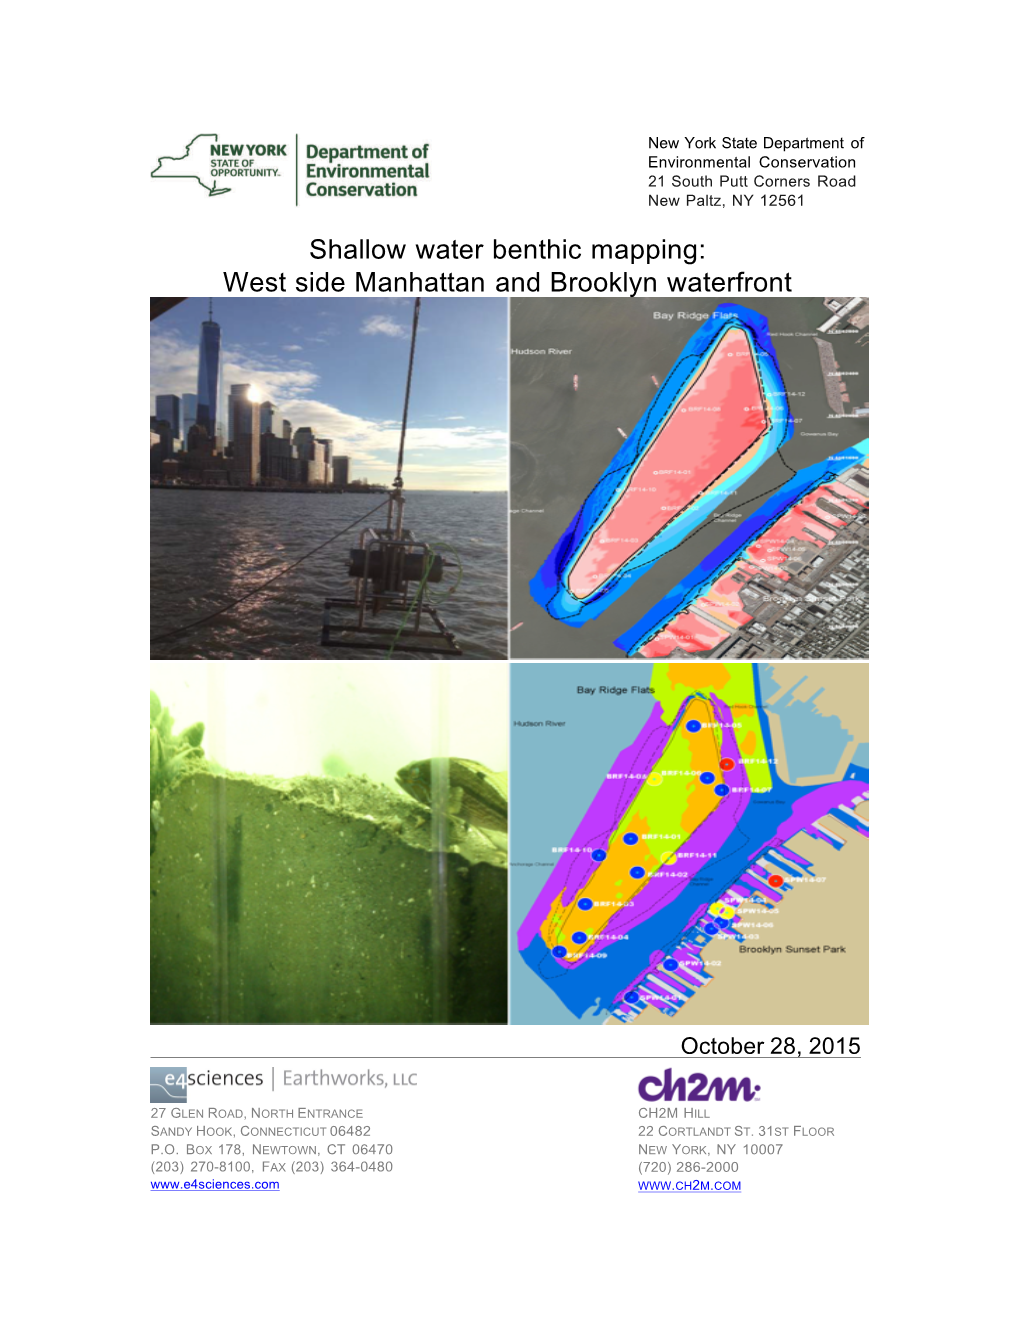 Shallow Water Benthic Mapping: West Side Manhattan and Brooklyn Waterfront